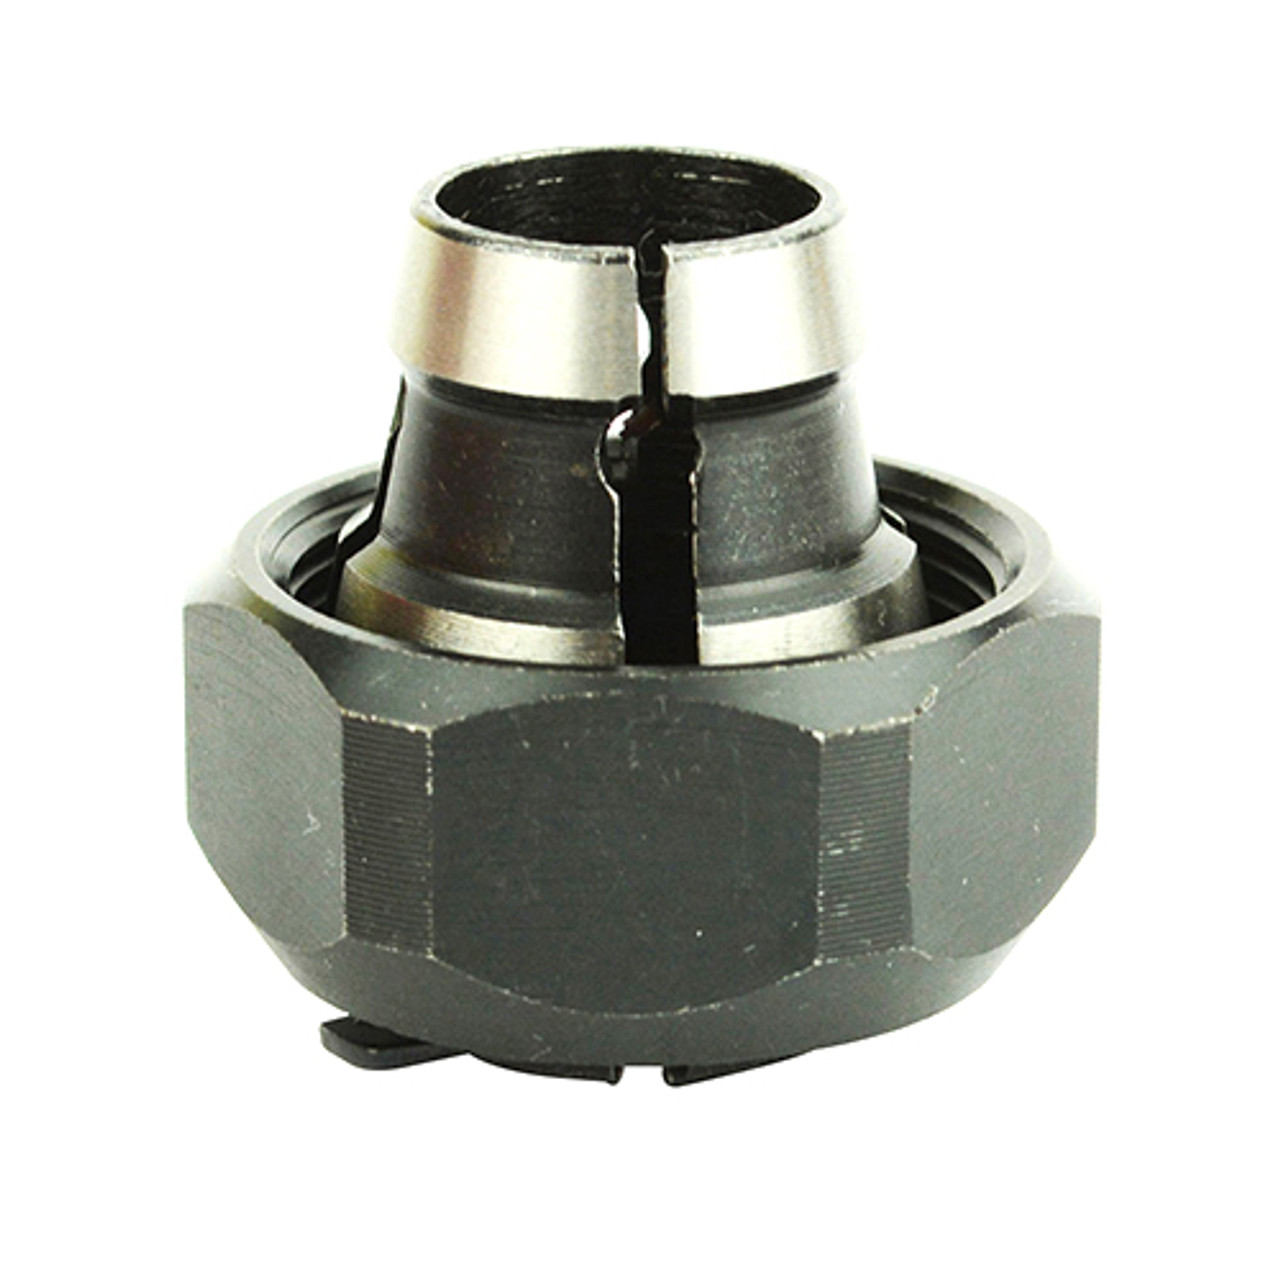 Looking for a Collet Replacement For Black & Decker 5/8 HP Router